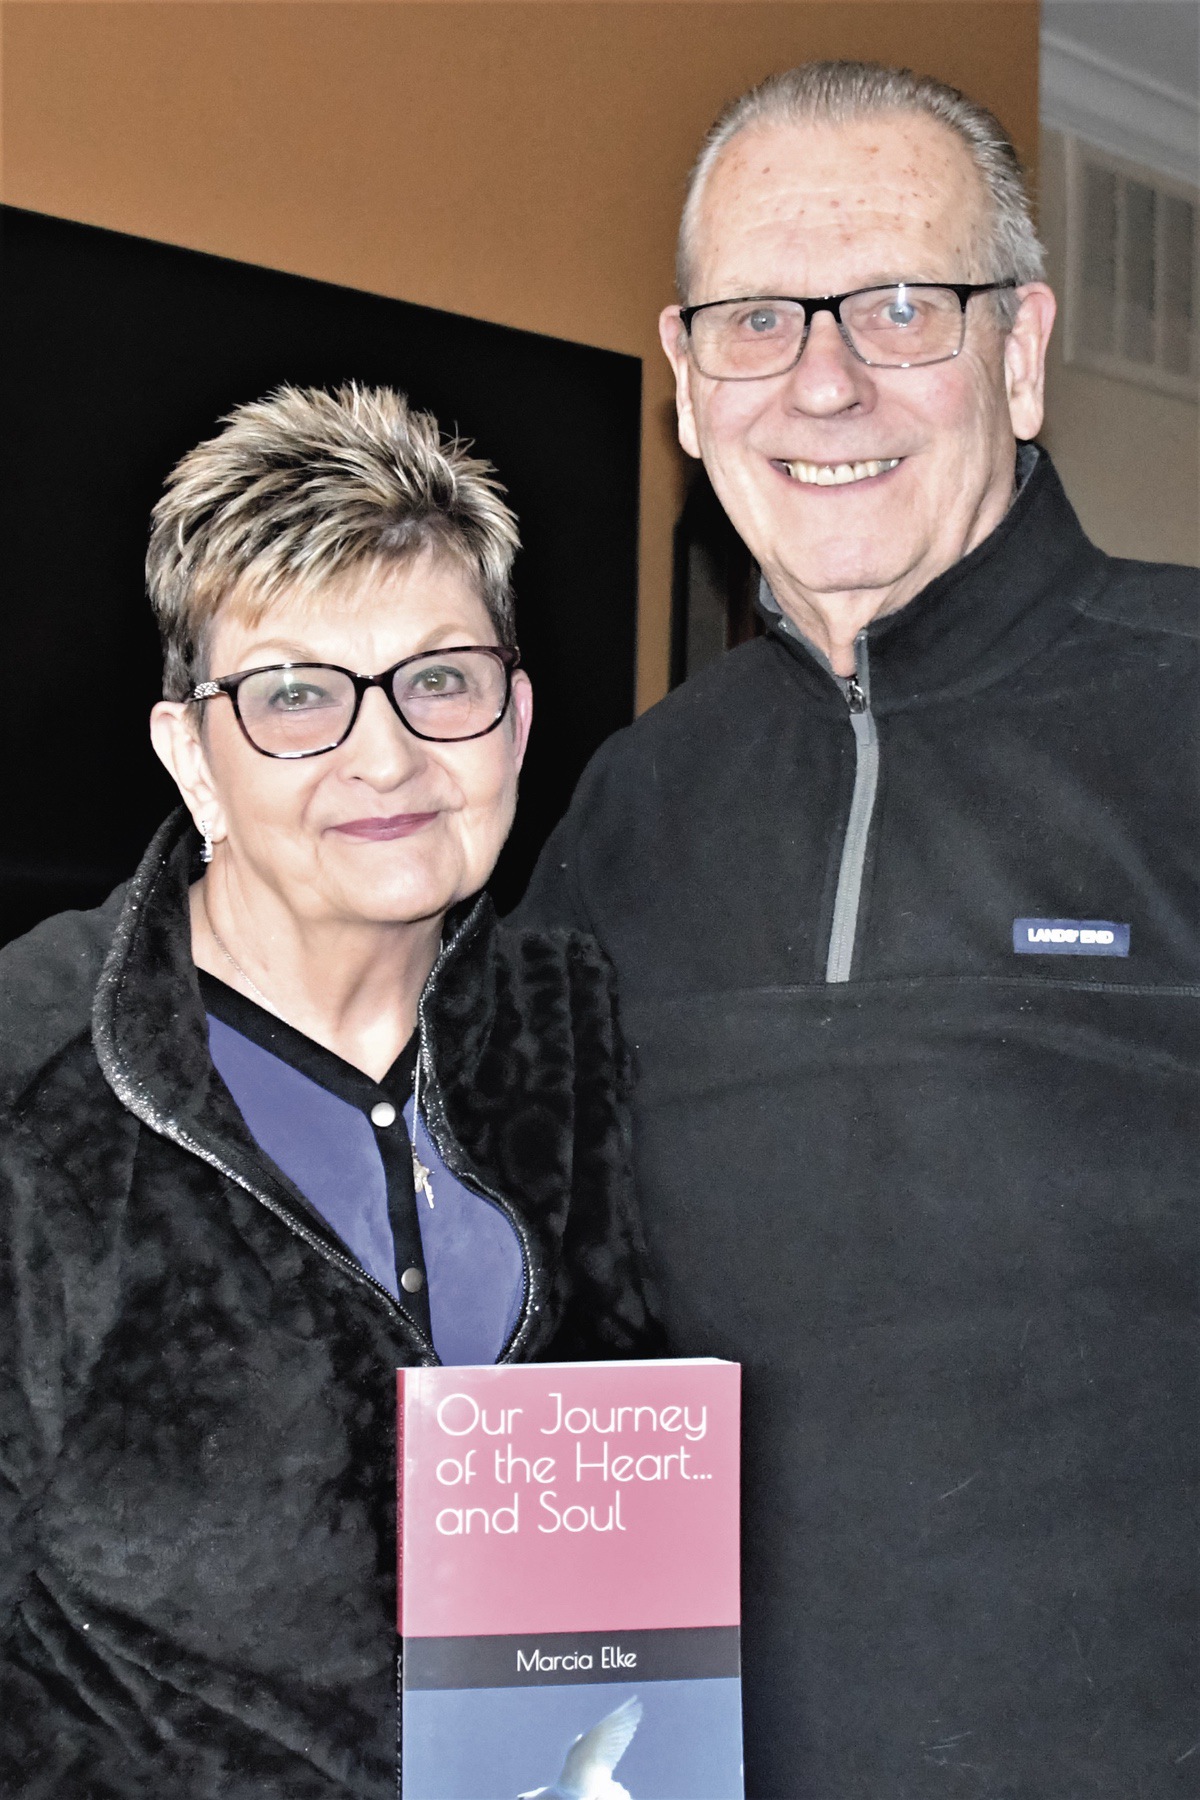 Throughout her husband’s longtime battle with heart disease, Marcia Elke kept a journal of thier experiences, which she later turned into a book. (Photo by Christine Such/My Sun Day News)